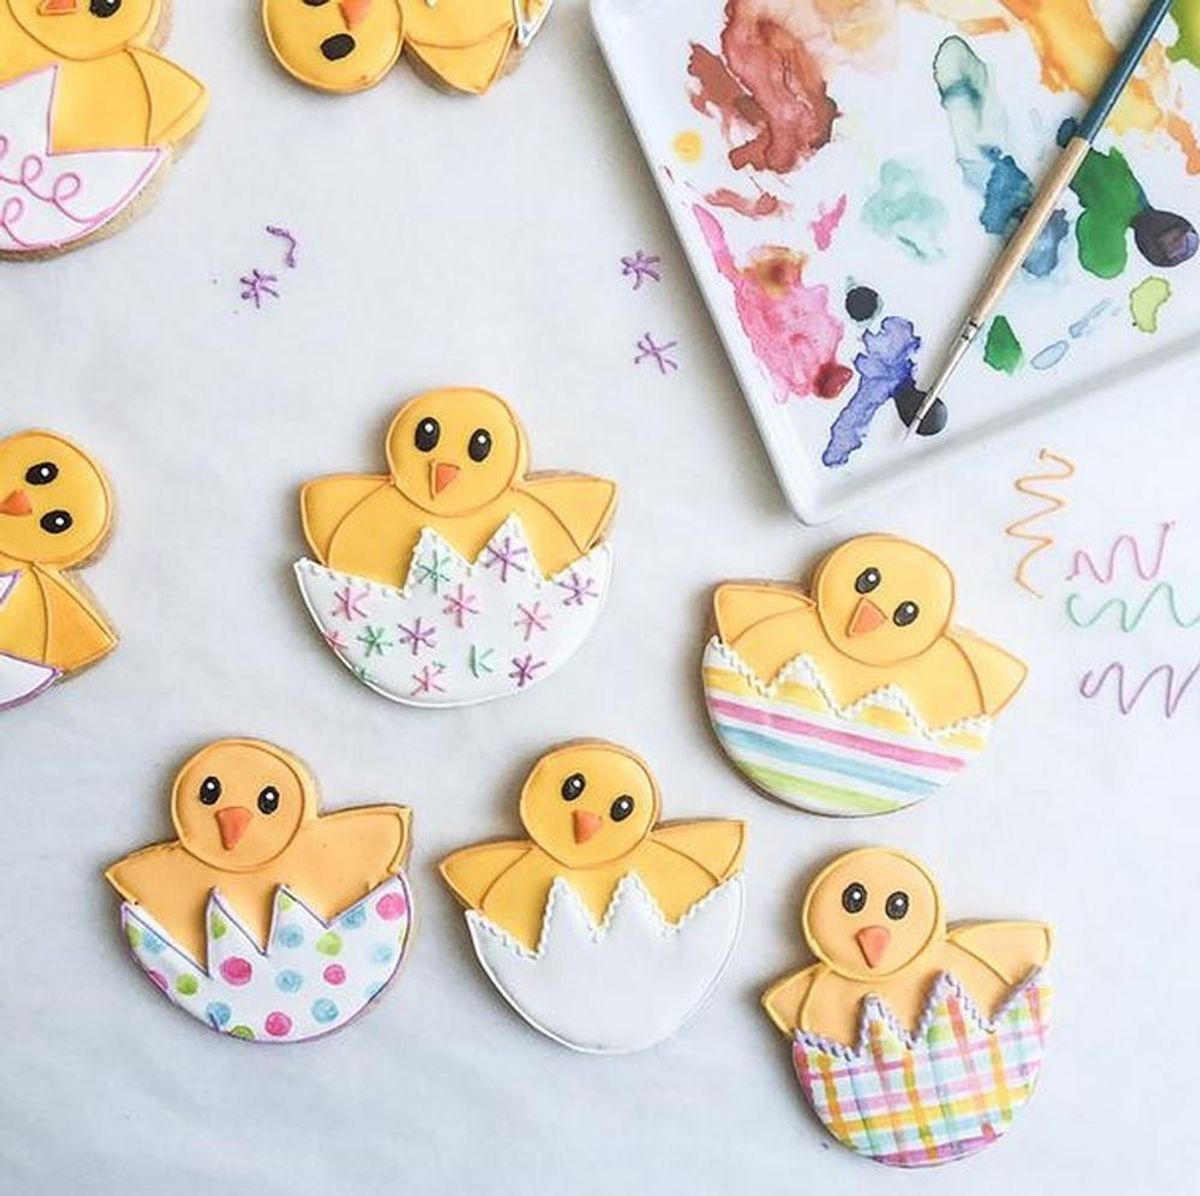 How to Become an Expert Emoji Cookie Decorator